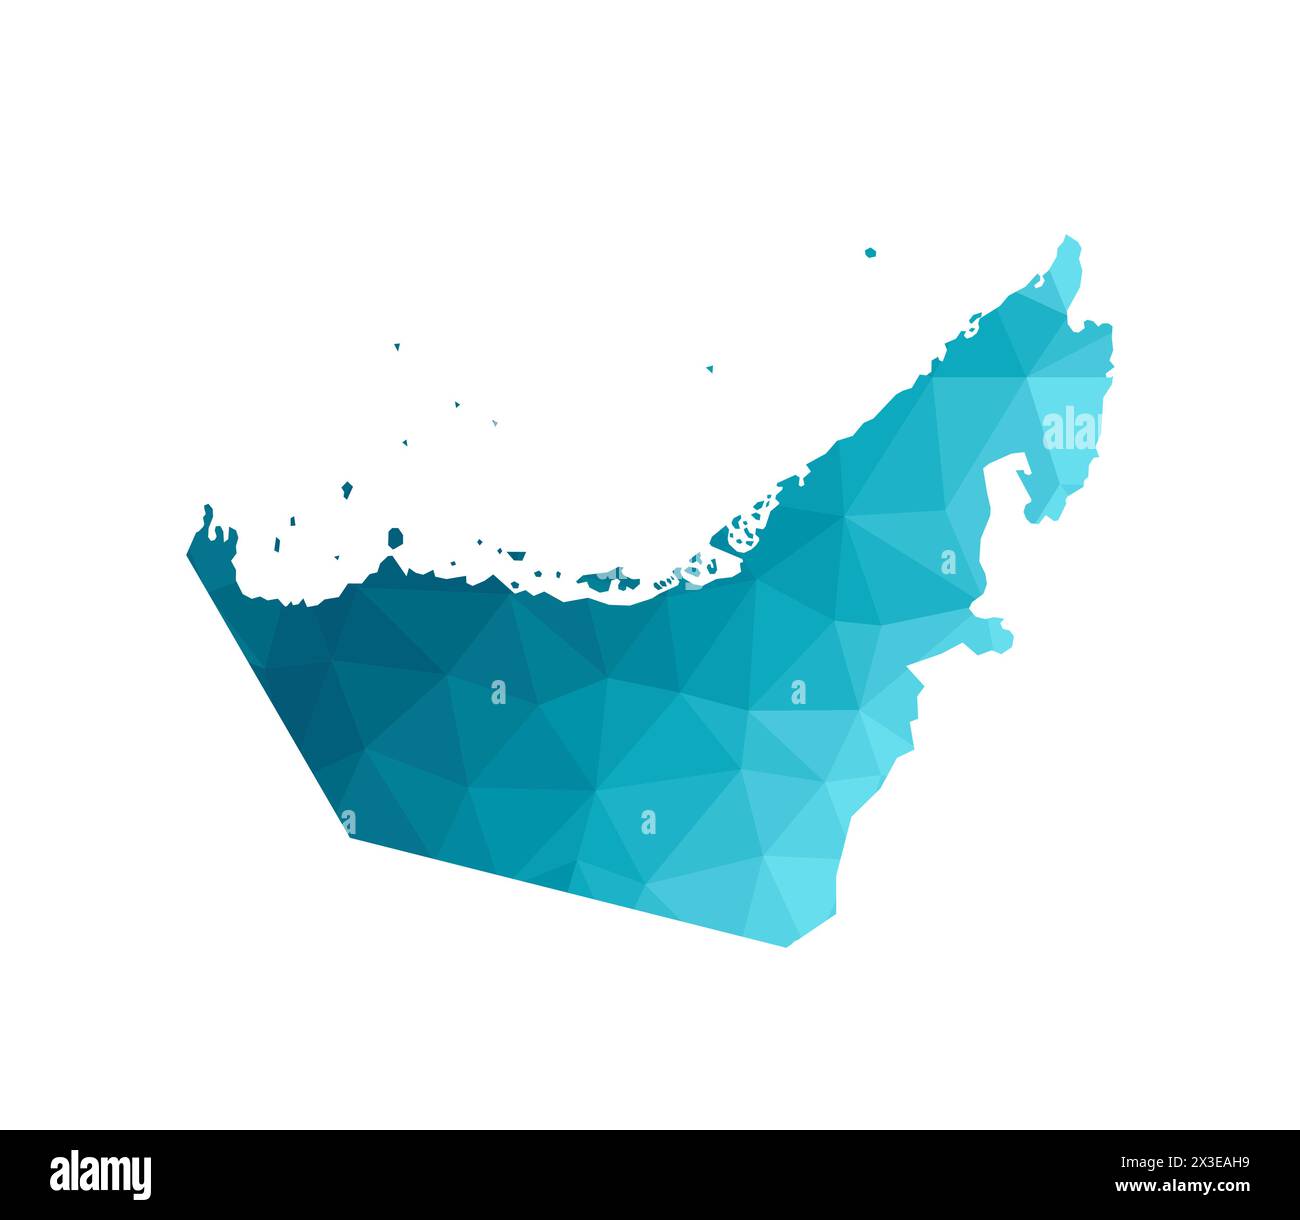 Vector illustration with simplified blue silhouette of United Arab Emirates, UAE map. Polygonal triangular style. White background. Stock Vector